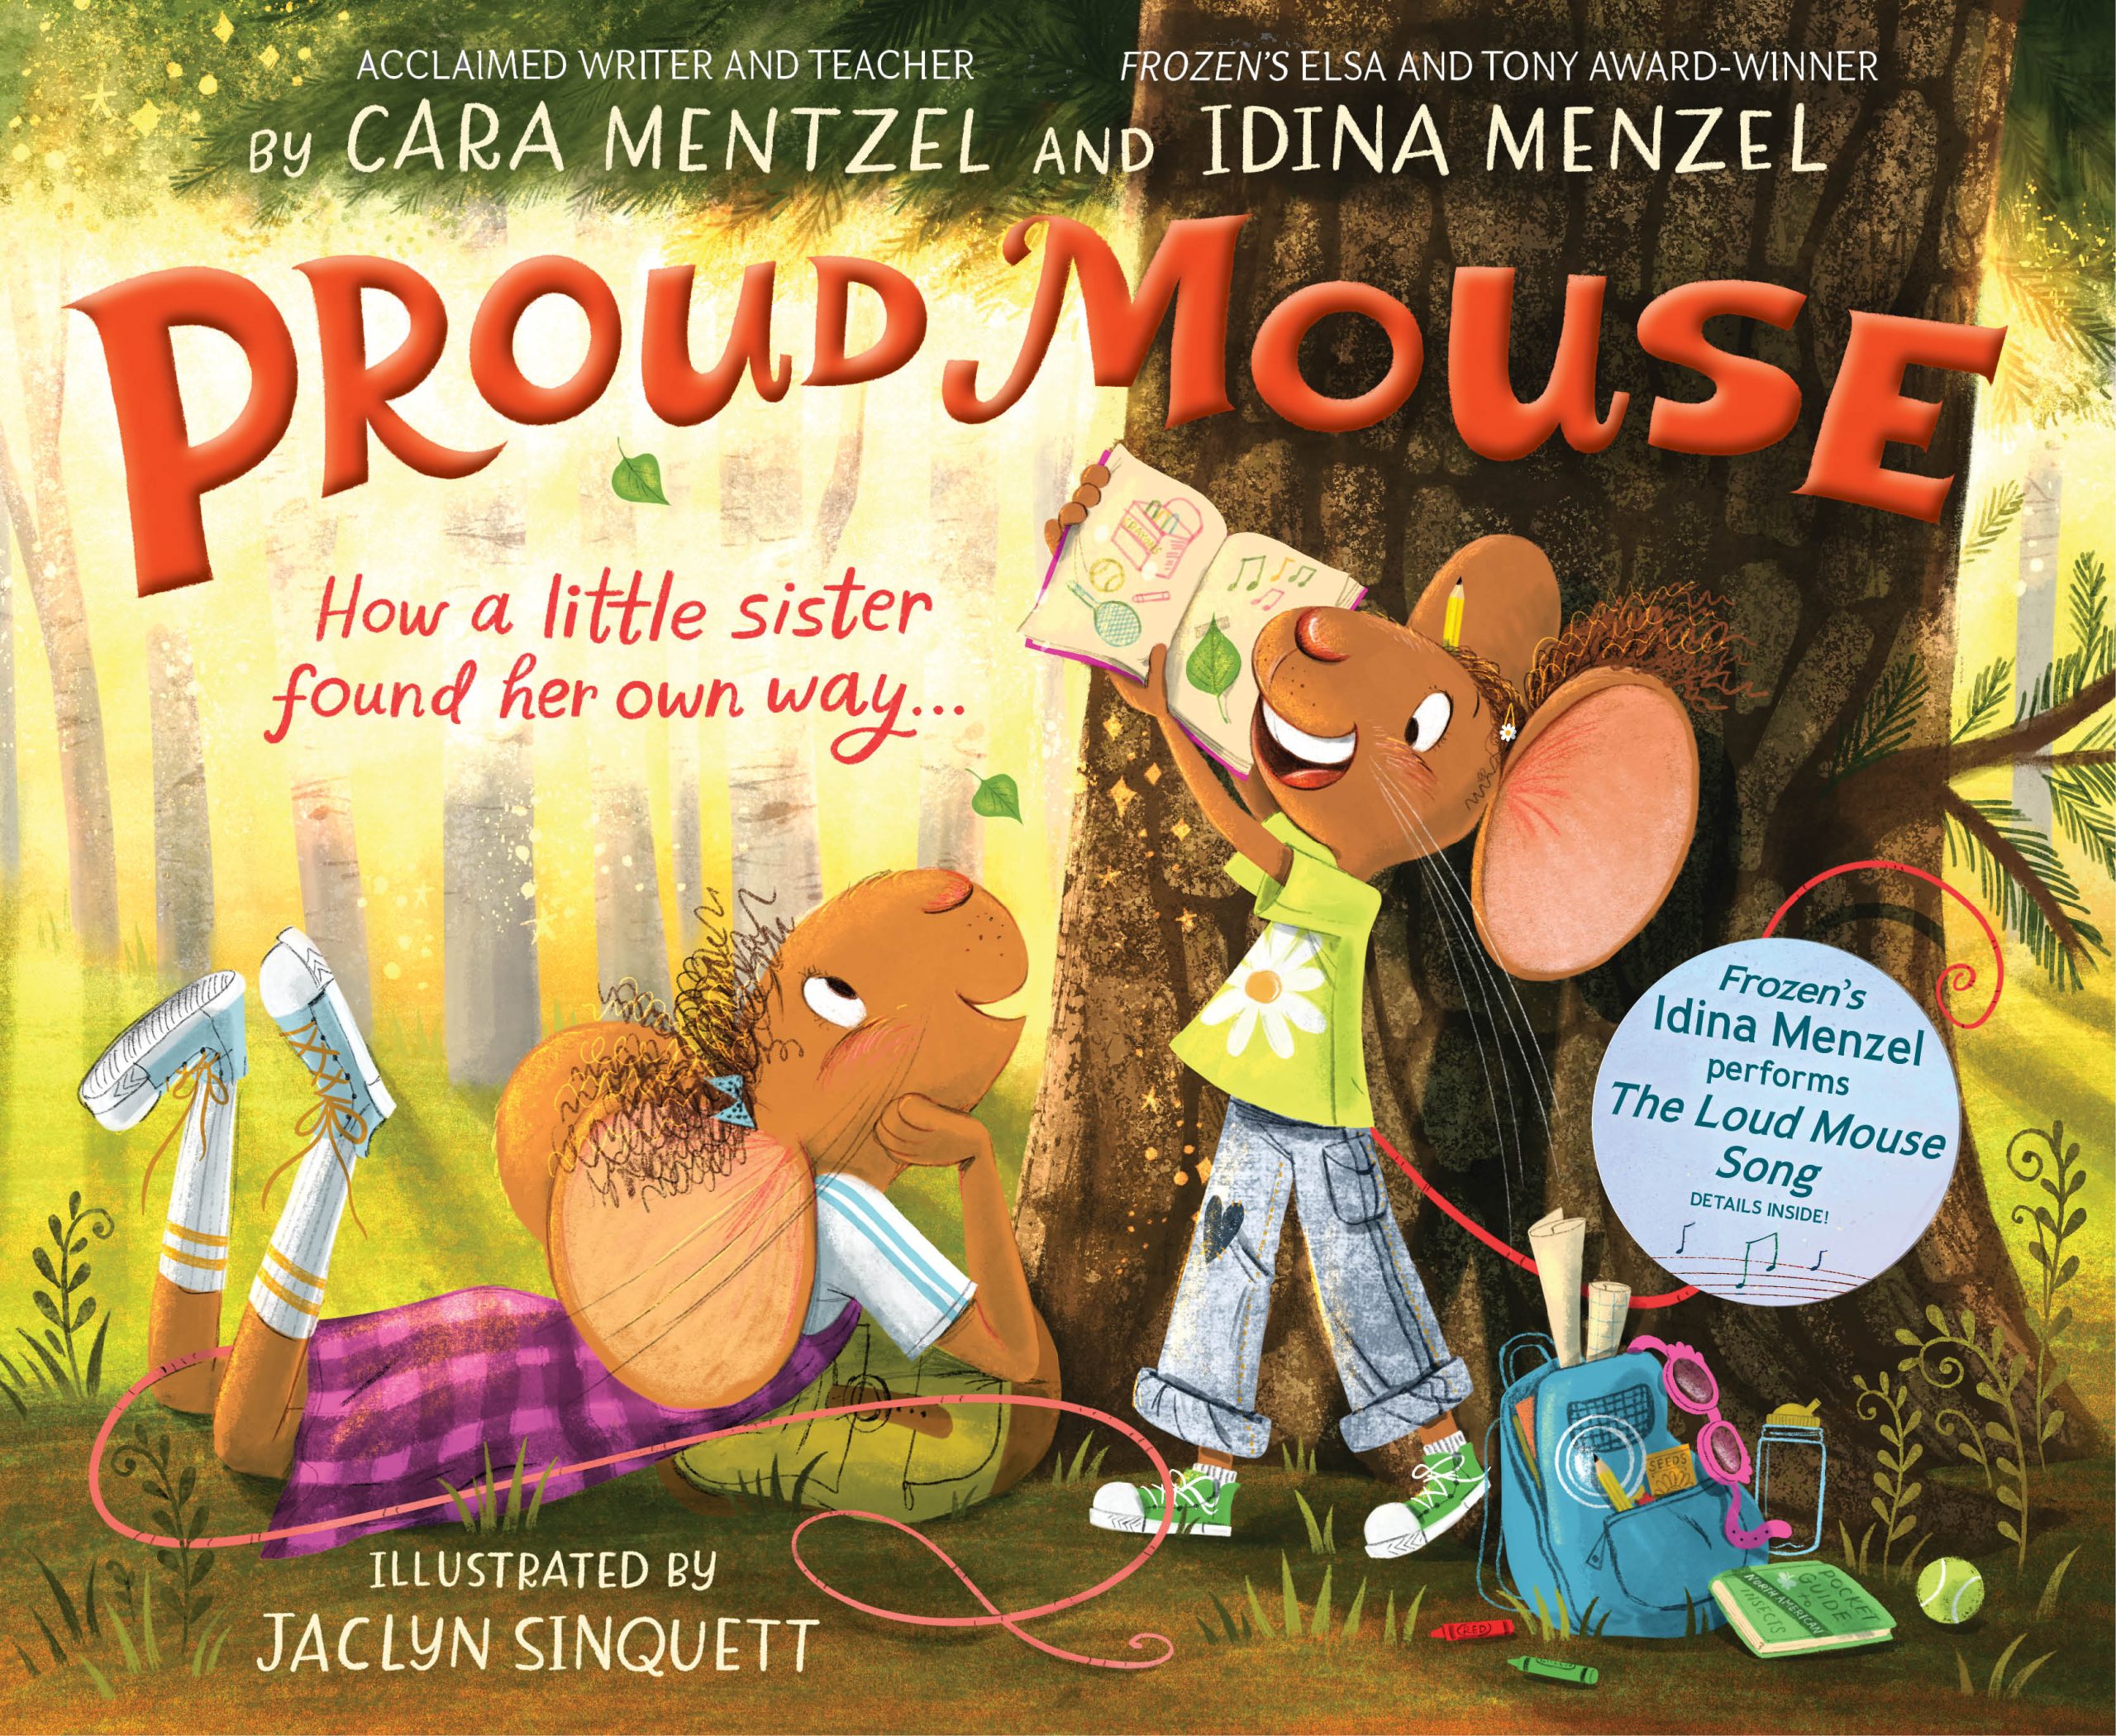 The cover of the new children’s book Proud Mouse is depicted. It reads at top: “By acclaimed writer and teacher Cara Mentzel and Frozen’s Elsa and Tony Award Winner Idina Menzel.” The title, Proud Mouse, appears in large red bubble-shaped letters above the subhead: “How a little sister found her own way.” At the bottom of cover, it reads “Illustrated by Jacklyn Sinquett.” One mouse character dressed in a pink dress with knee-length socks and sneakers is lying on the ground in a forest staring up at her sister, also a mouse who holds an open book with an excited look on her face. She wears a green shirt with daisy on it, wide-leg jeans, and green sneakers. An open blue knapsack with papers and pink swim-goggles is visible, with crayons and a tennis ball spilled out.